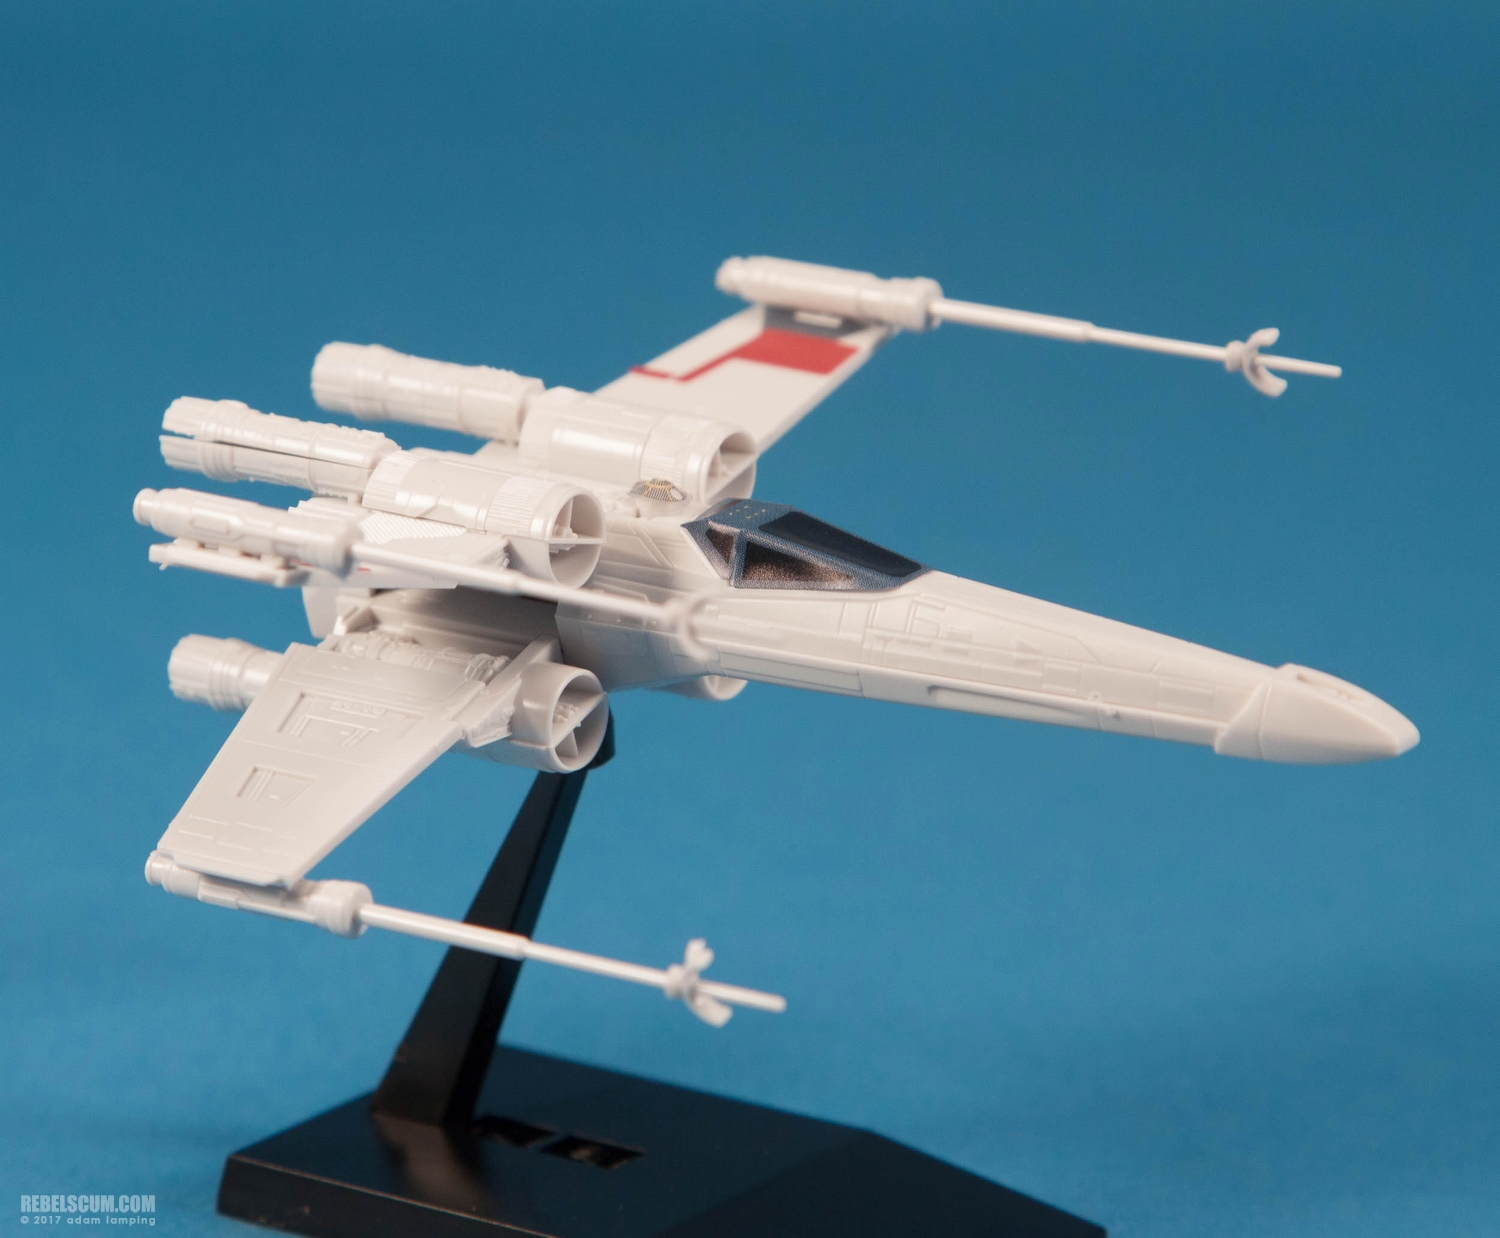 bandai-red-squadron-x-wing-starfighter-scale-model-kit-018.jpg